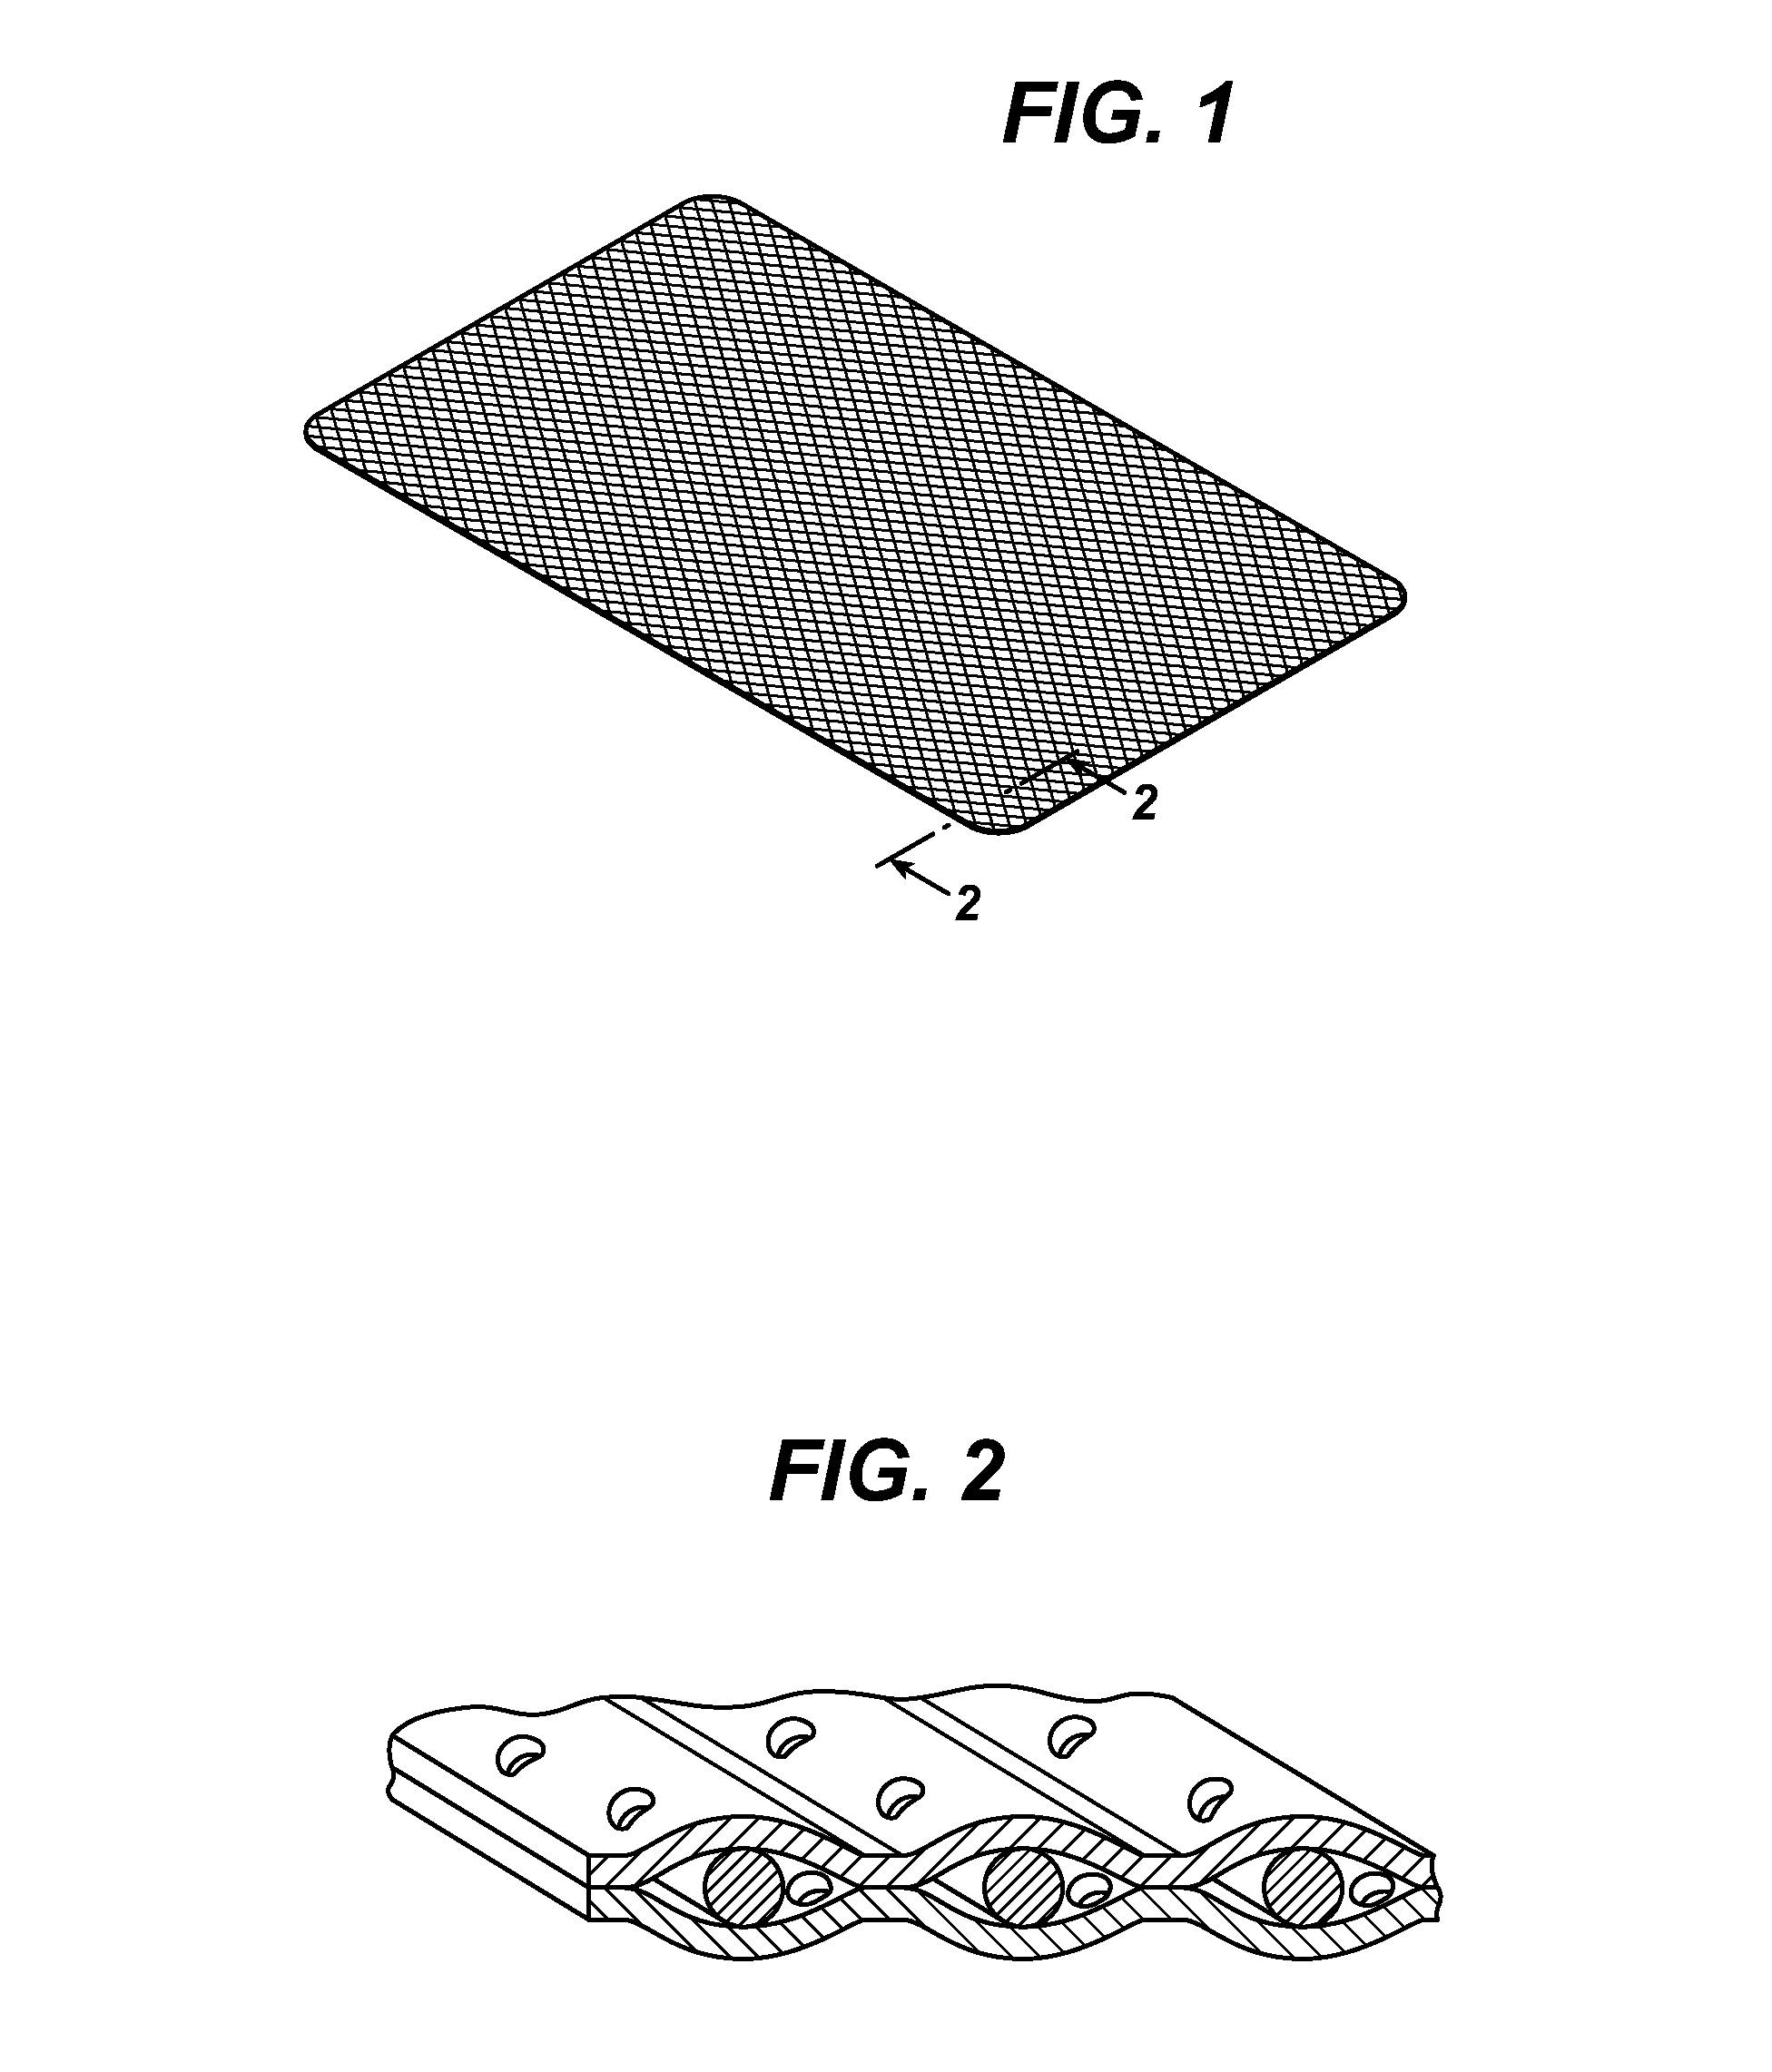 Tissue repair devices of rapid therapeutic absorbency